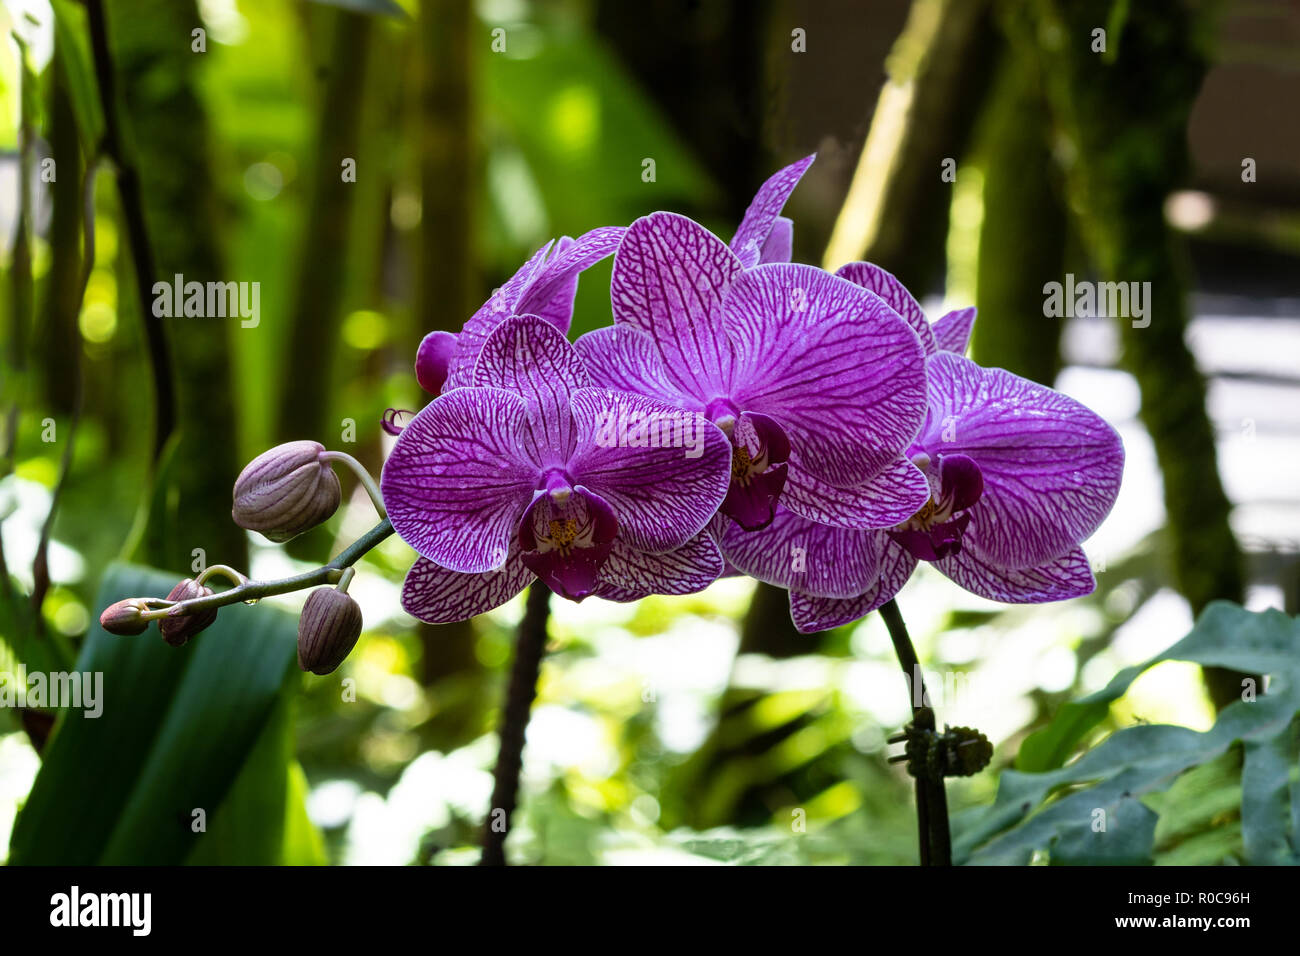 Bunch of phalaenopsis (moth shaped) orchids at Botanical garden in Hilo, Hawaii. Dark purple striped petals; ferns and green leaves in background. Stock Photo